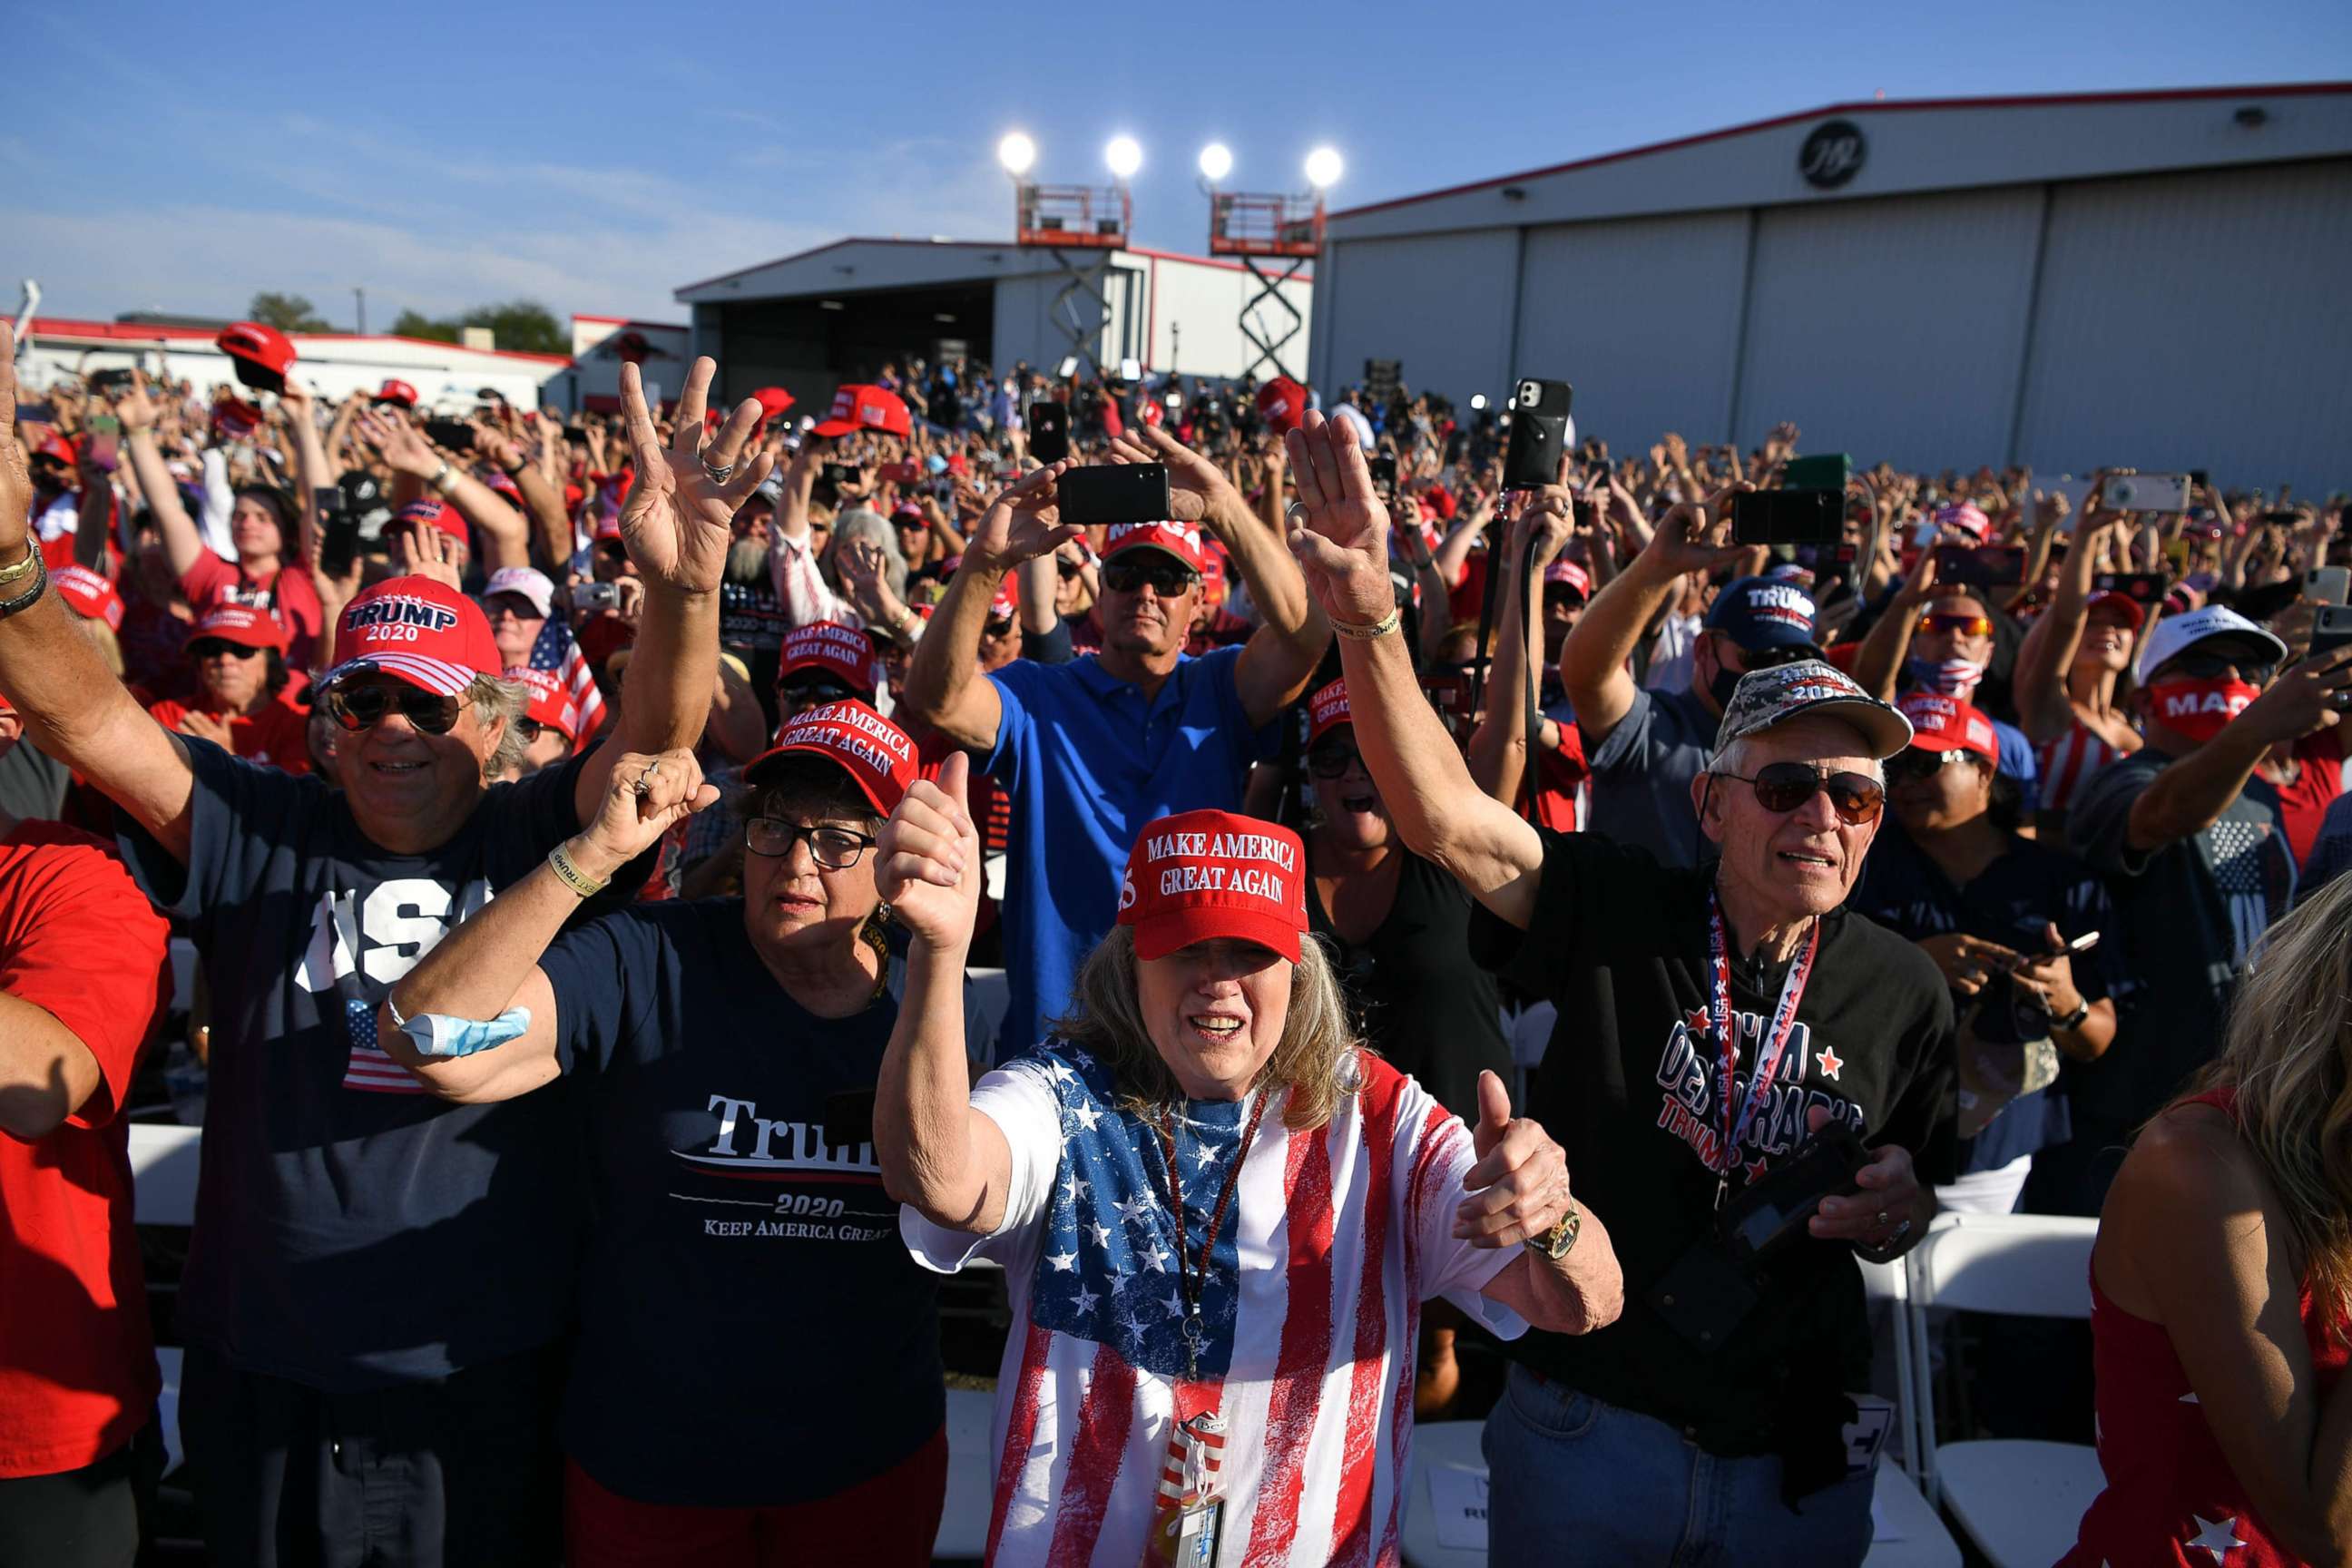 PHOTO: Supporters of President Donald Trump cheer during a rally at Prescott Regional Airport in Prescott, Arizona on Oct. 19, 2020.